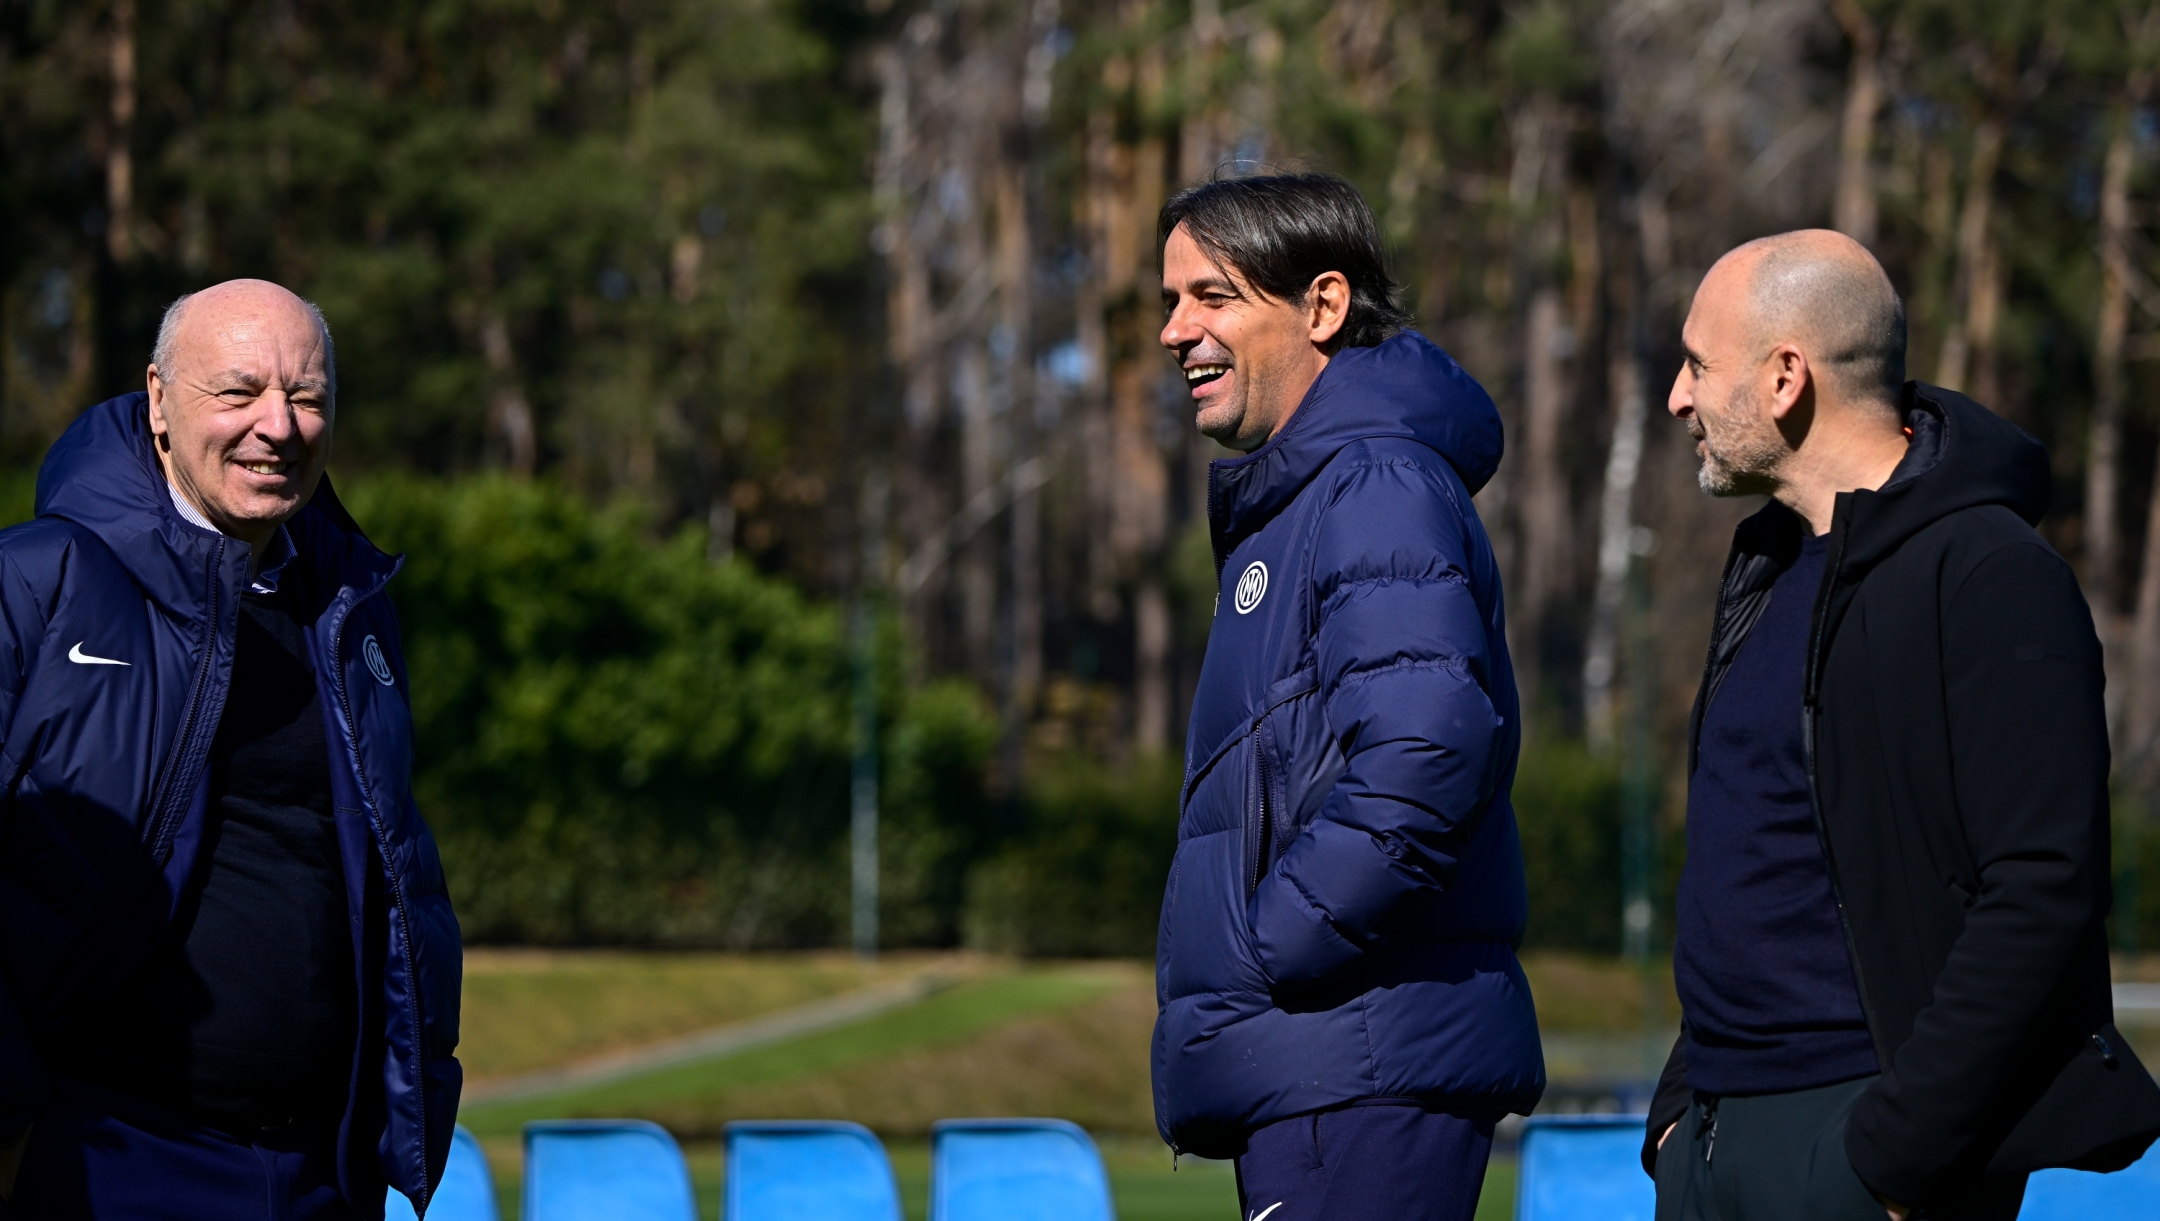 COMO, ITALY - MARCH 12: Sport CEO Giuseppe Marotta of FC Internazionale, Sport Director Piero Ausilio and Head Coach Simone Inzaghi of FC Internazionale during the FC Internazionale training session at the club's training ground Suning Training Center on March 12, 2023 in Como, Italy. (Photo by Mattia Ozbot - Inter/Inter via Getty Images)